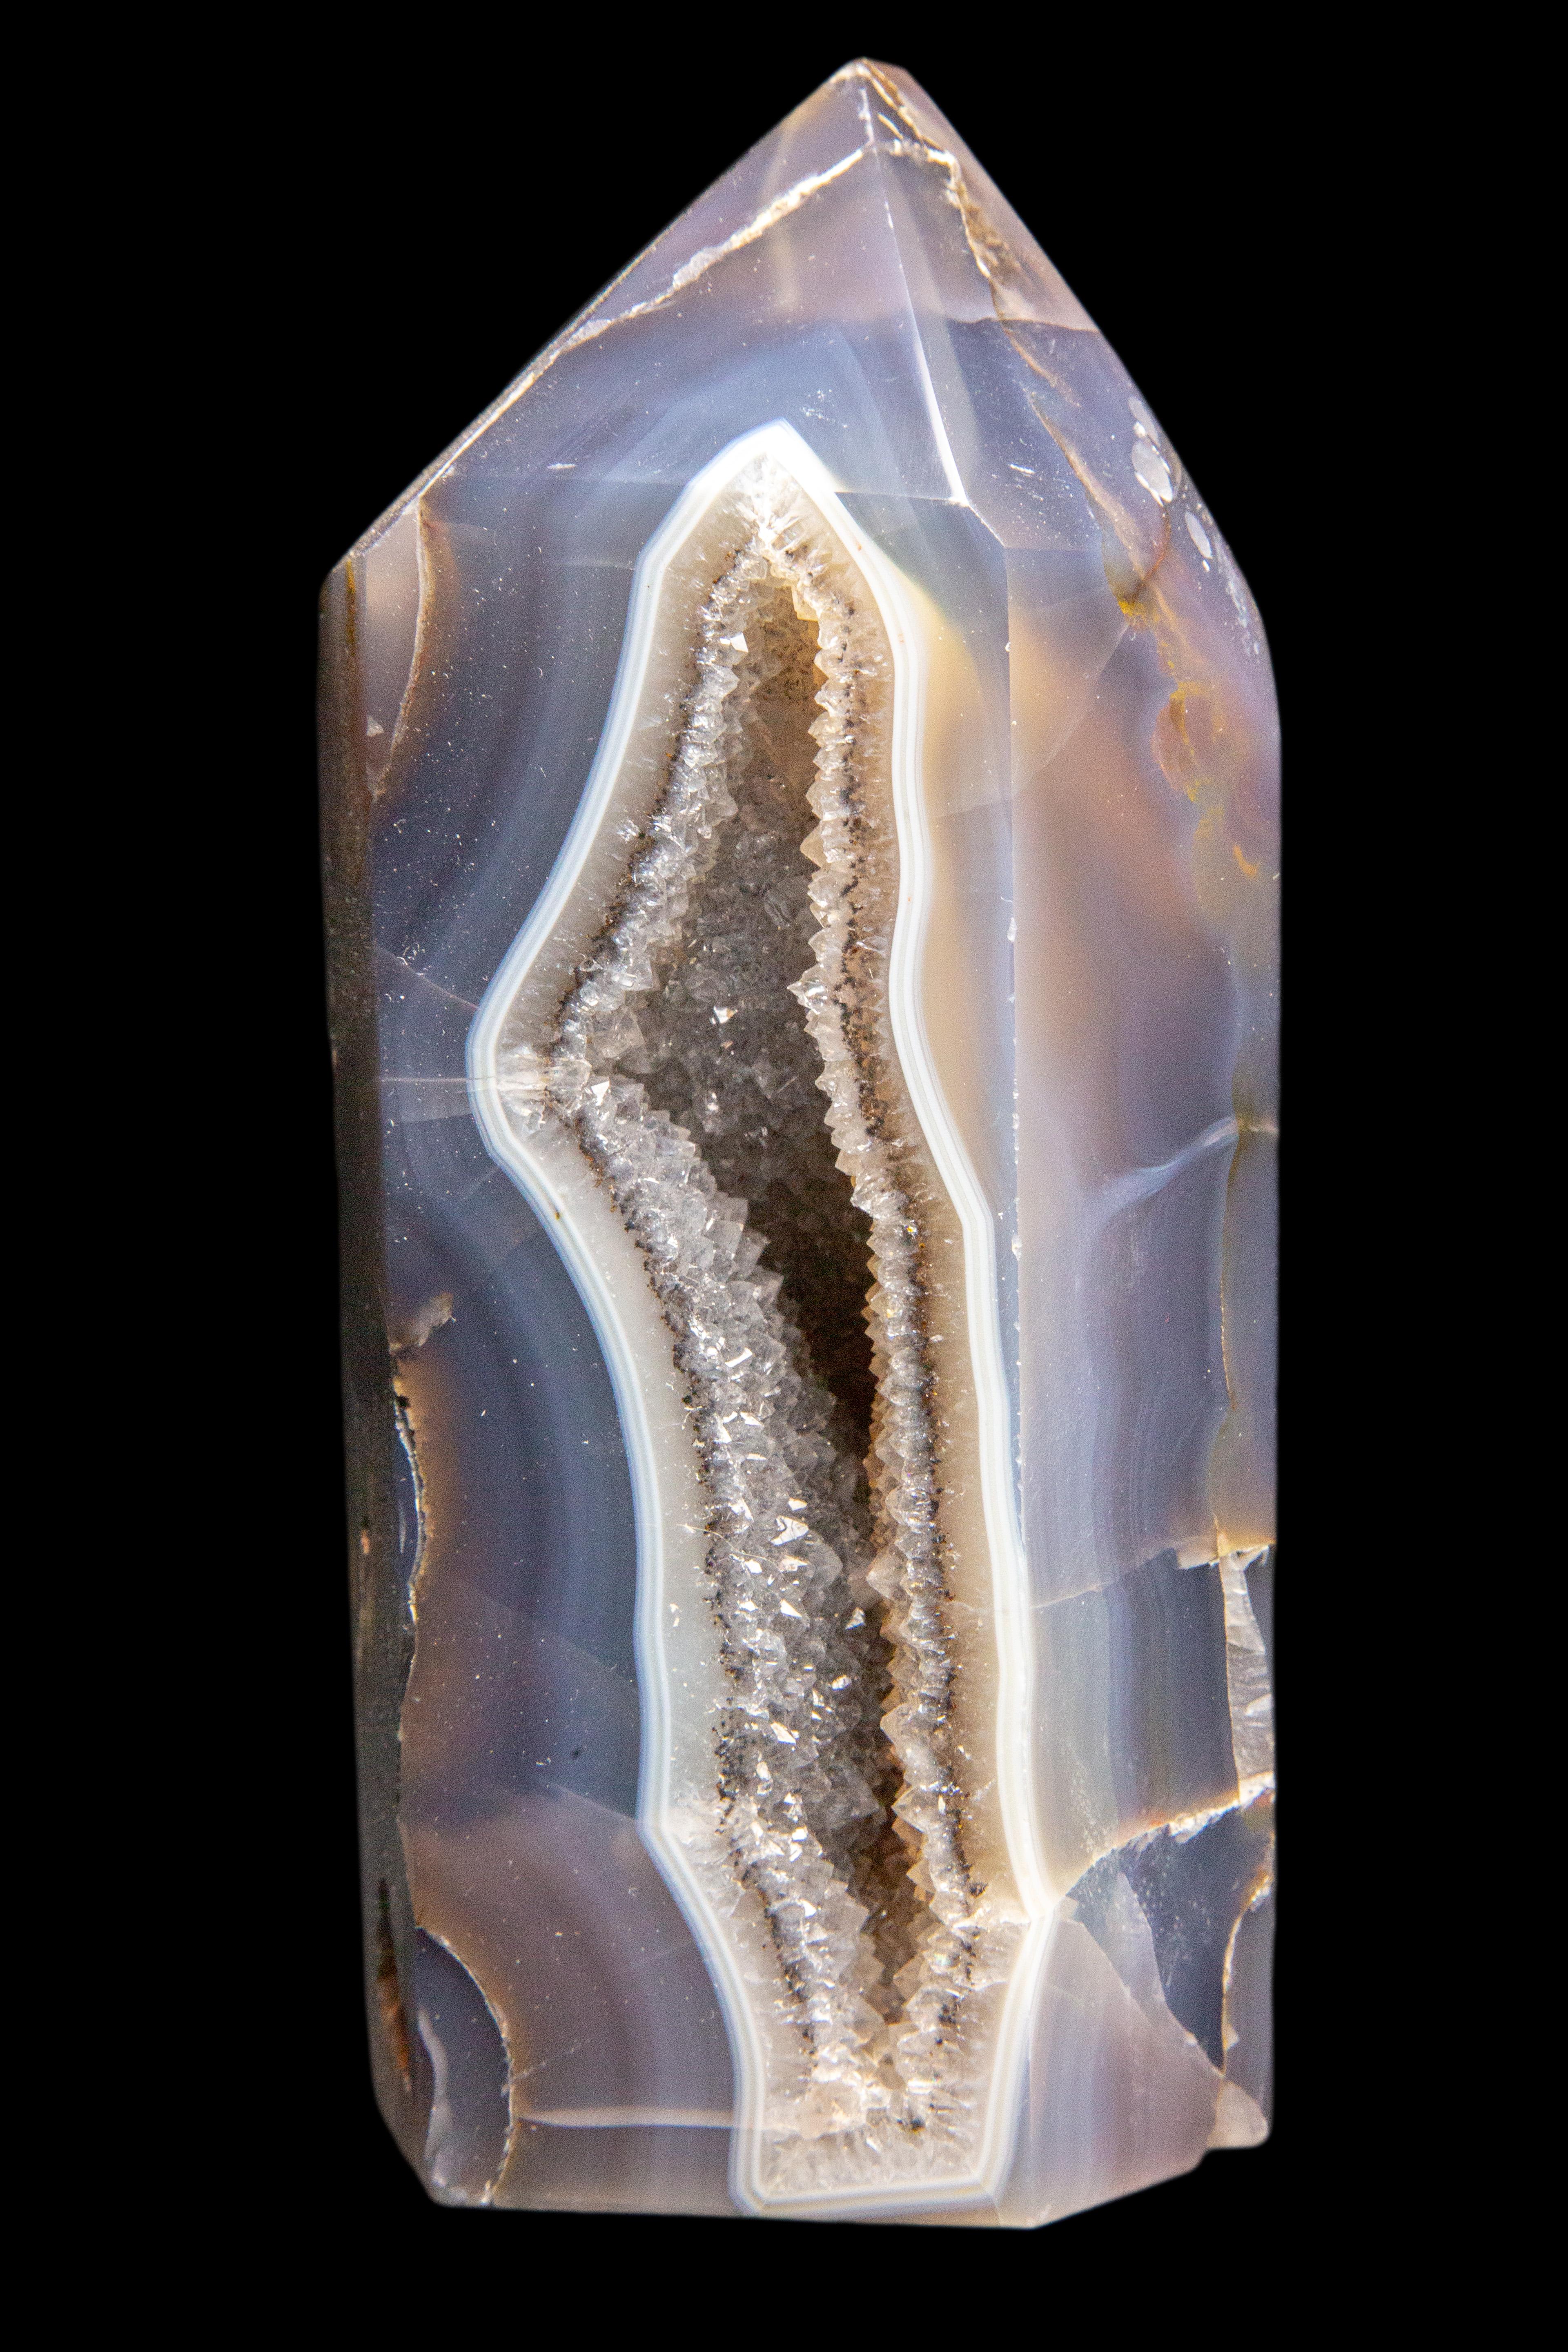 Agate Geode Point: is a geological secondary formation within sedimentary and volcanic rocks. Geodes are hollow, vaguely spherical rocks, in which masses of mineral matter (which may include crystals) are secluded. The crystals are formed by the